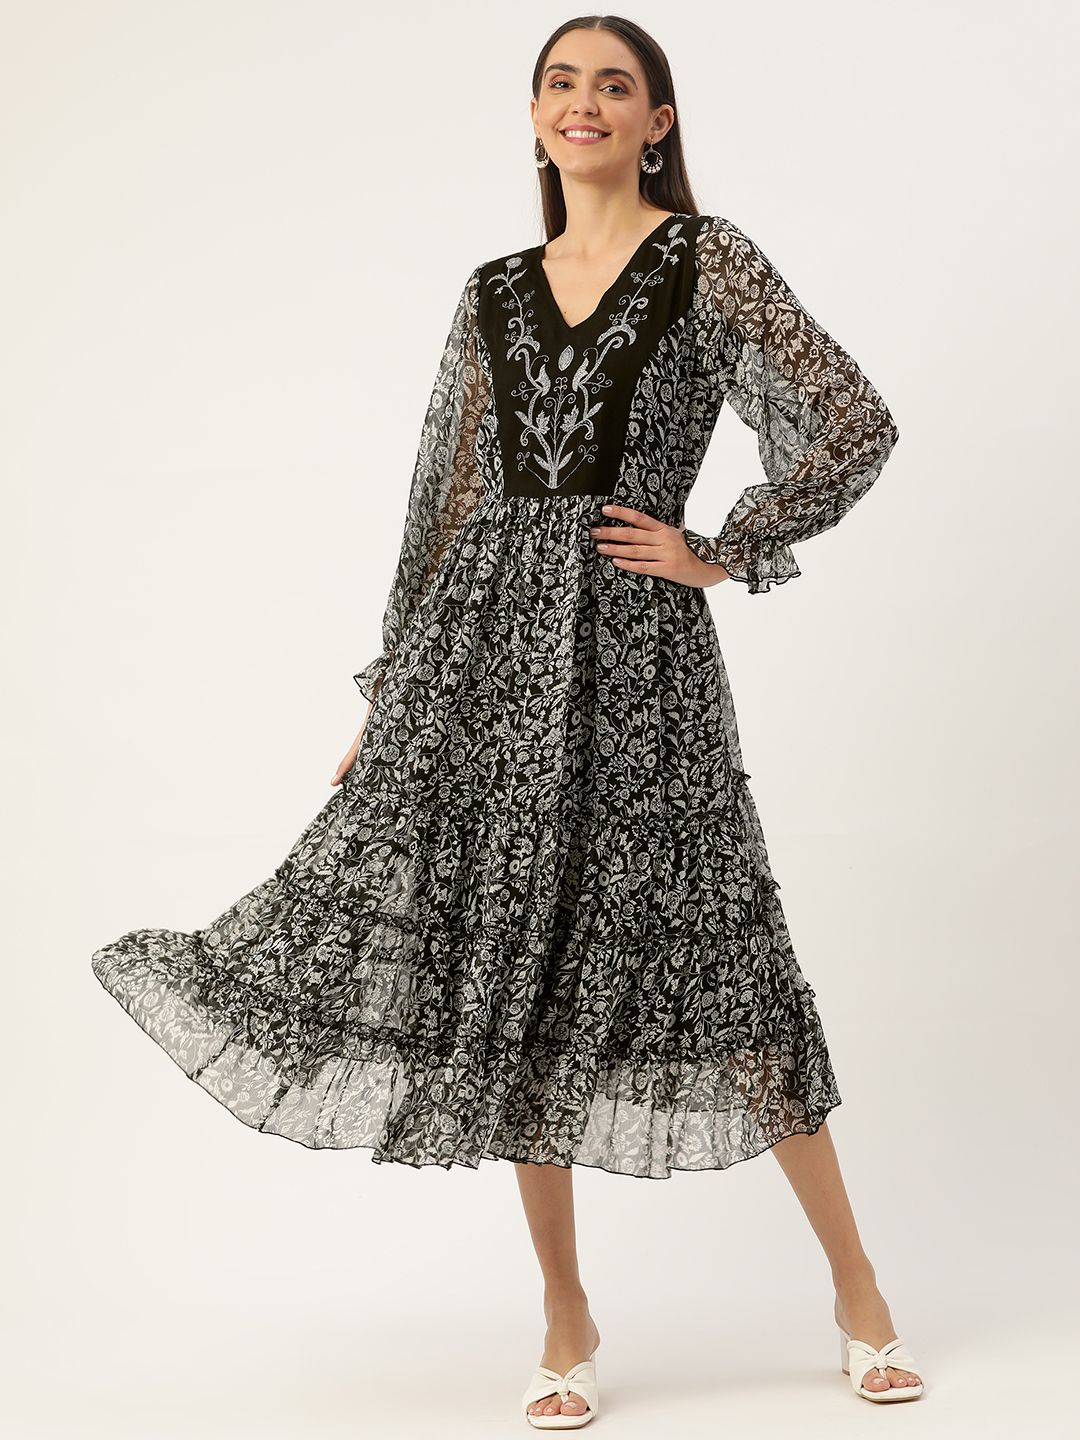 Antheaa Black & White Floral Embroidered Detail Tiered Dress Price in India